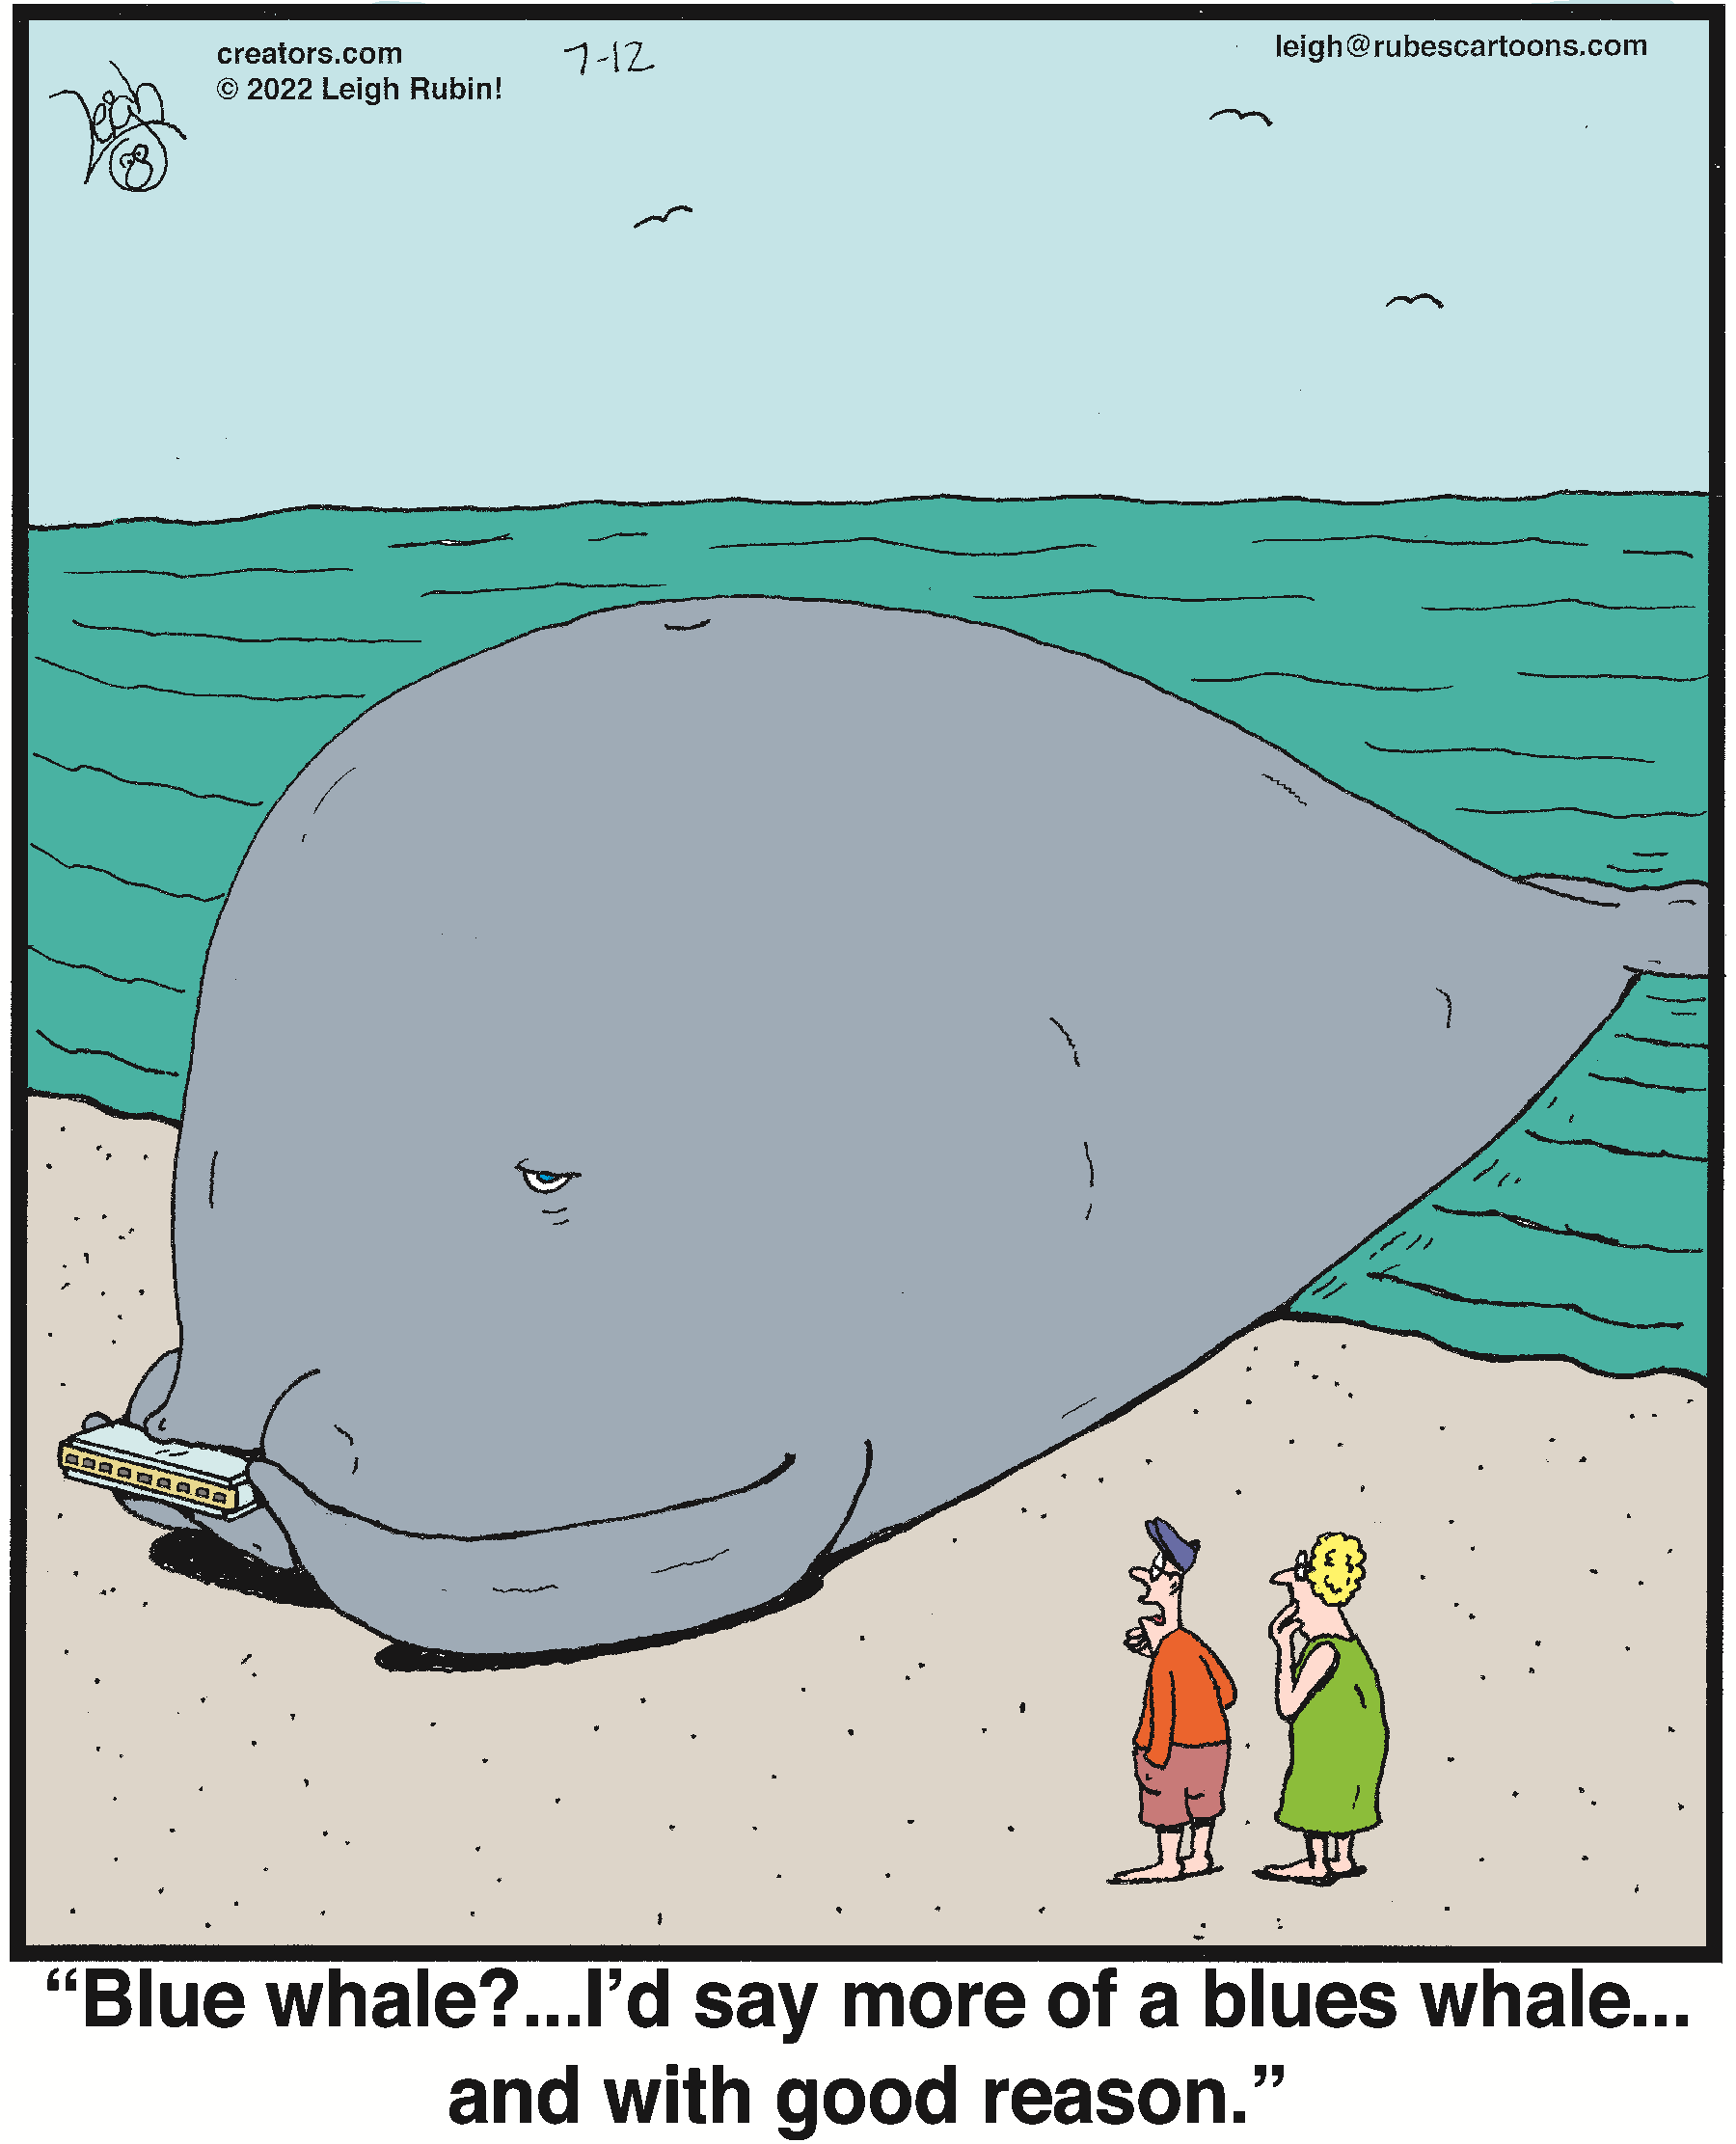 Boy, he can really whale on that thing!